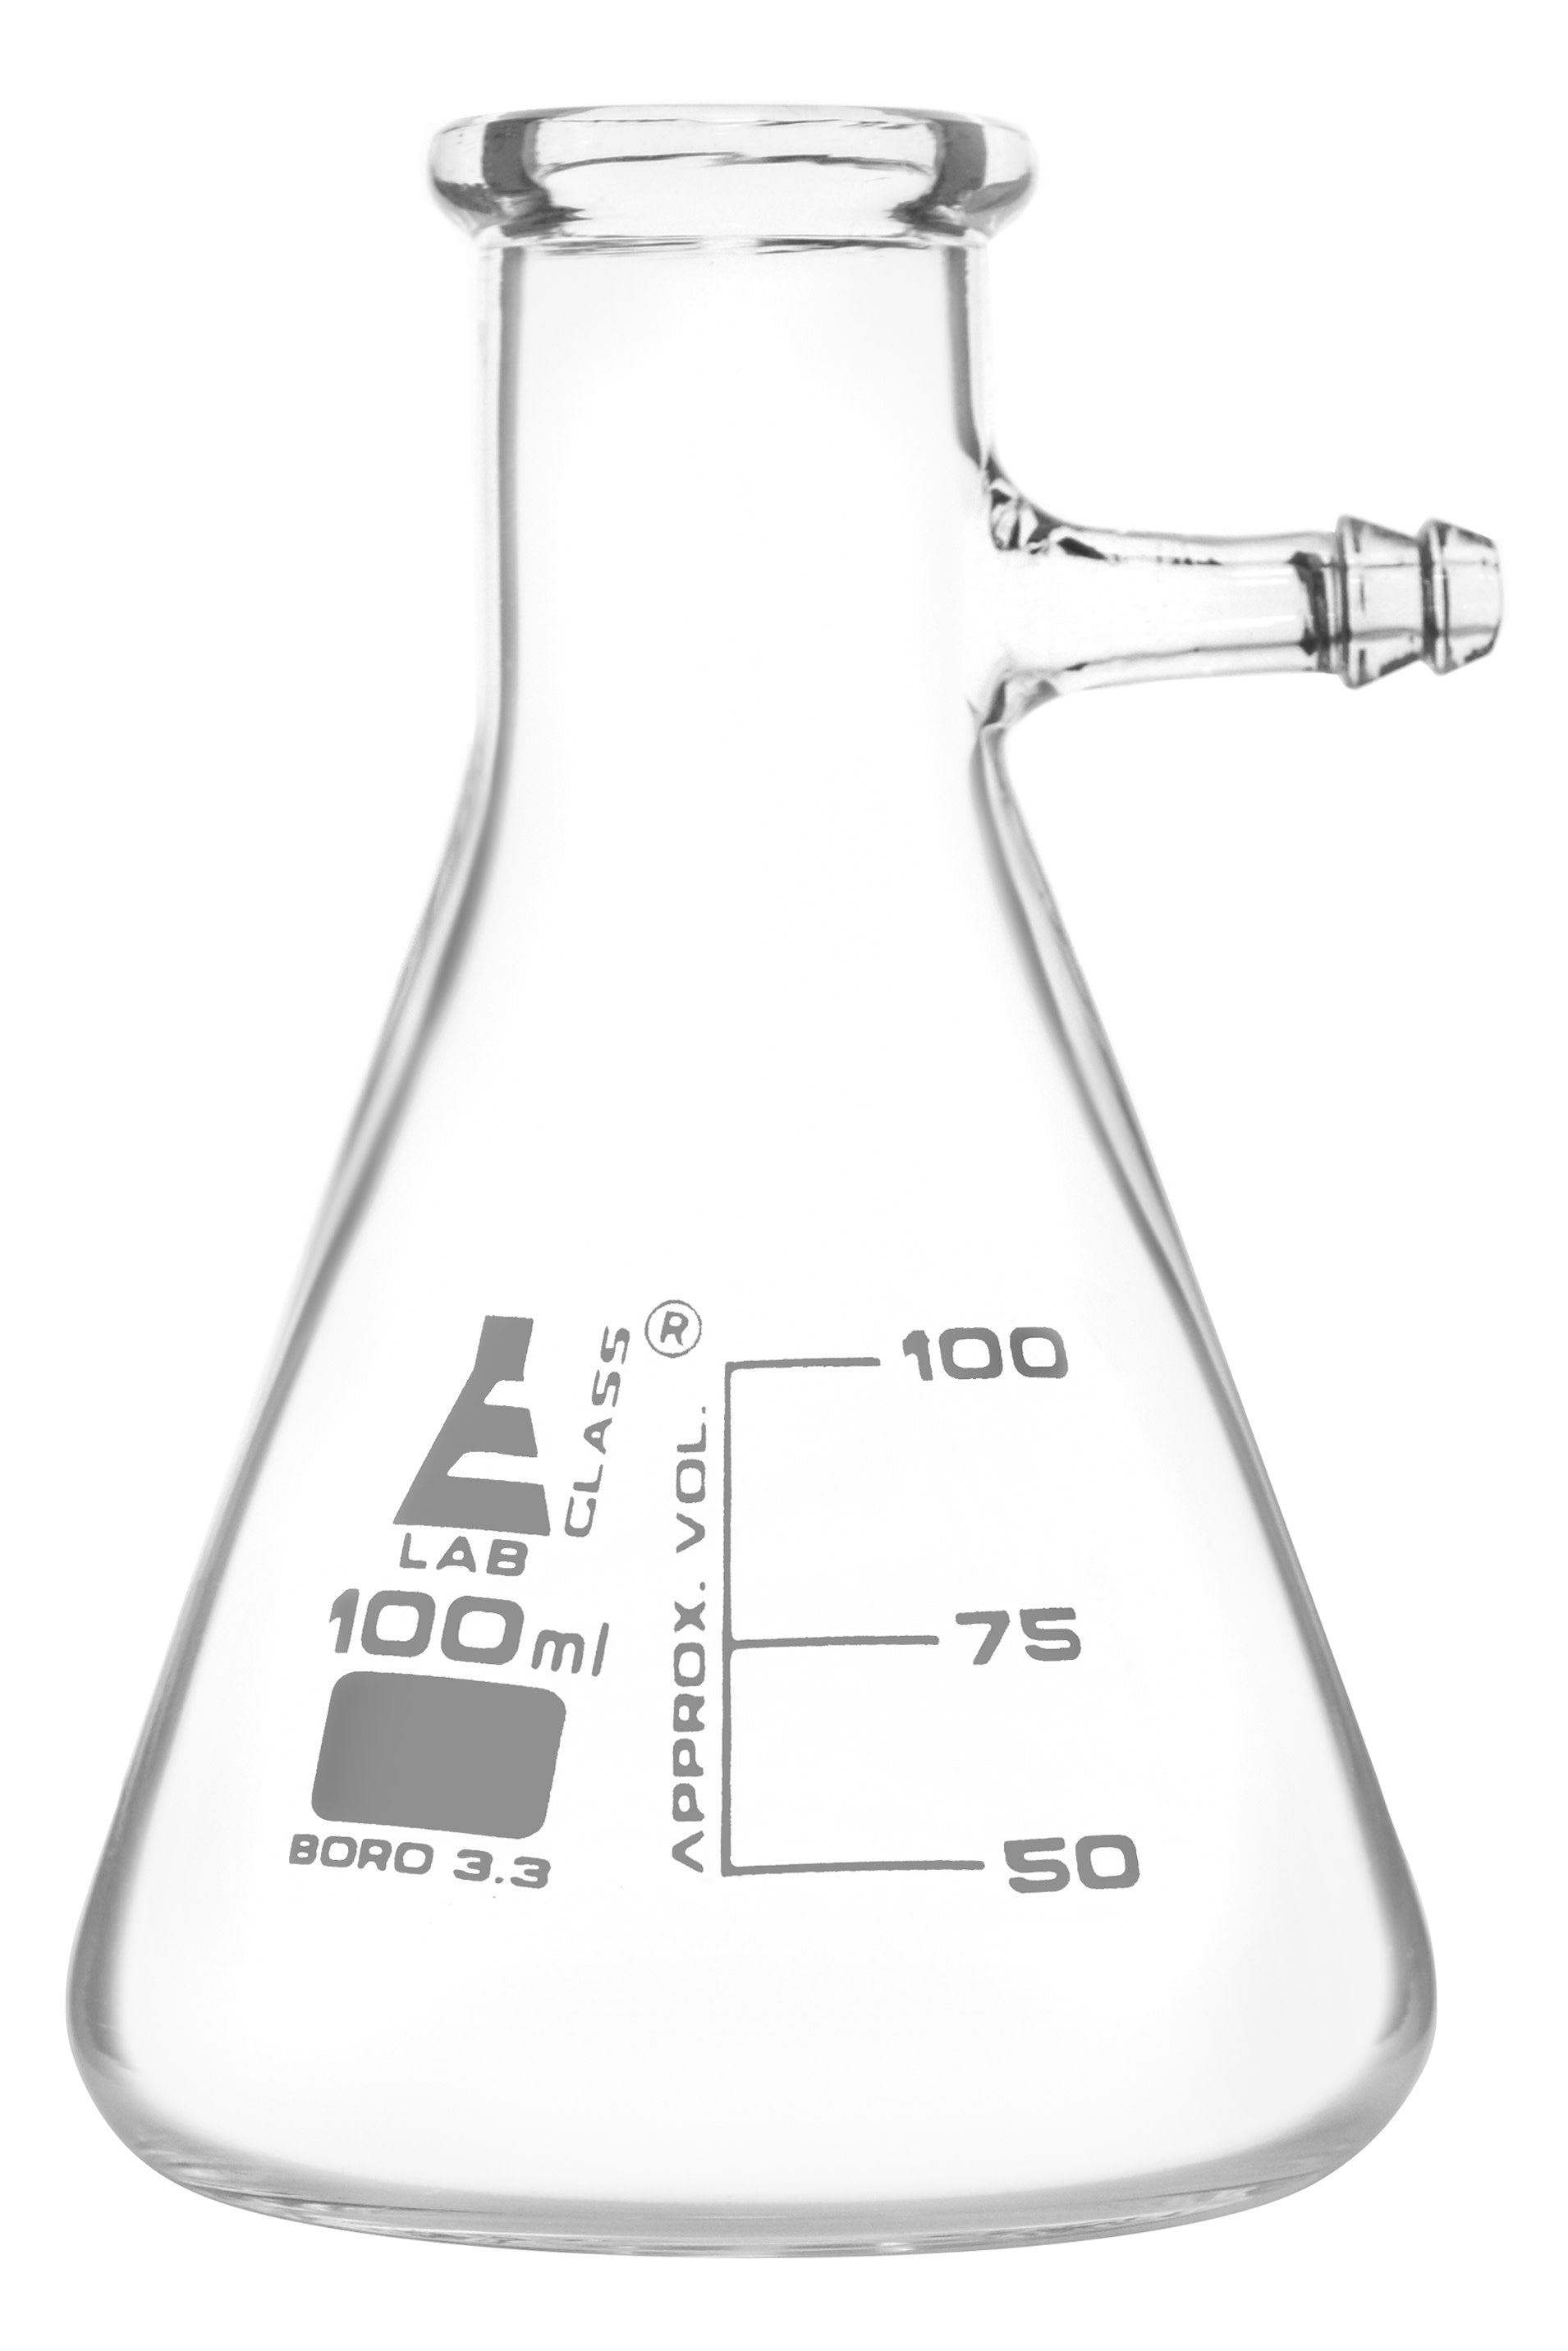 Borosilicate Glass Filtering Flask With Glass Connector, 100ml, Graduated, Autoclavable